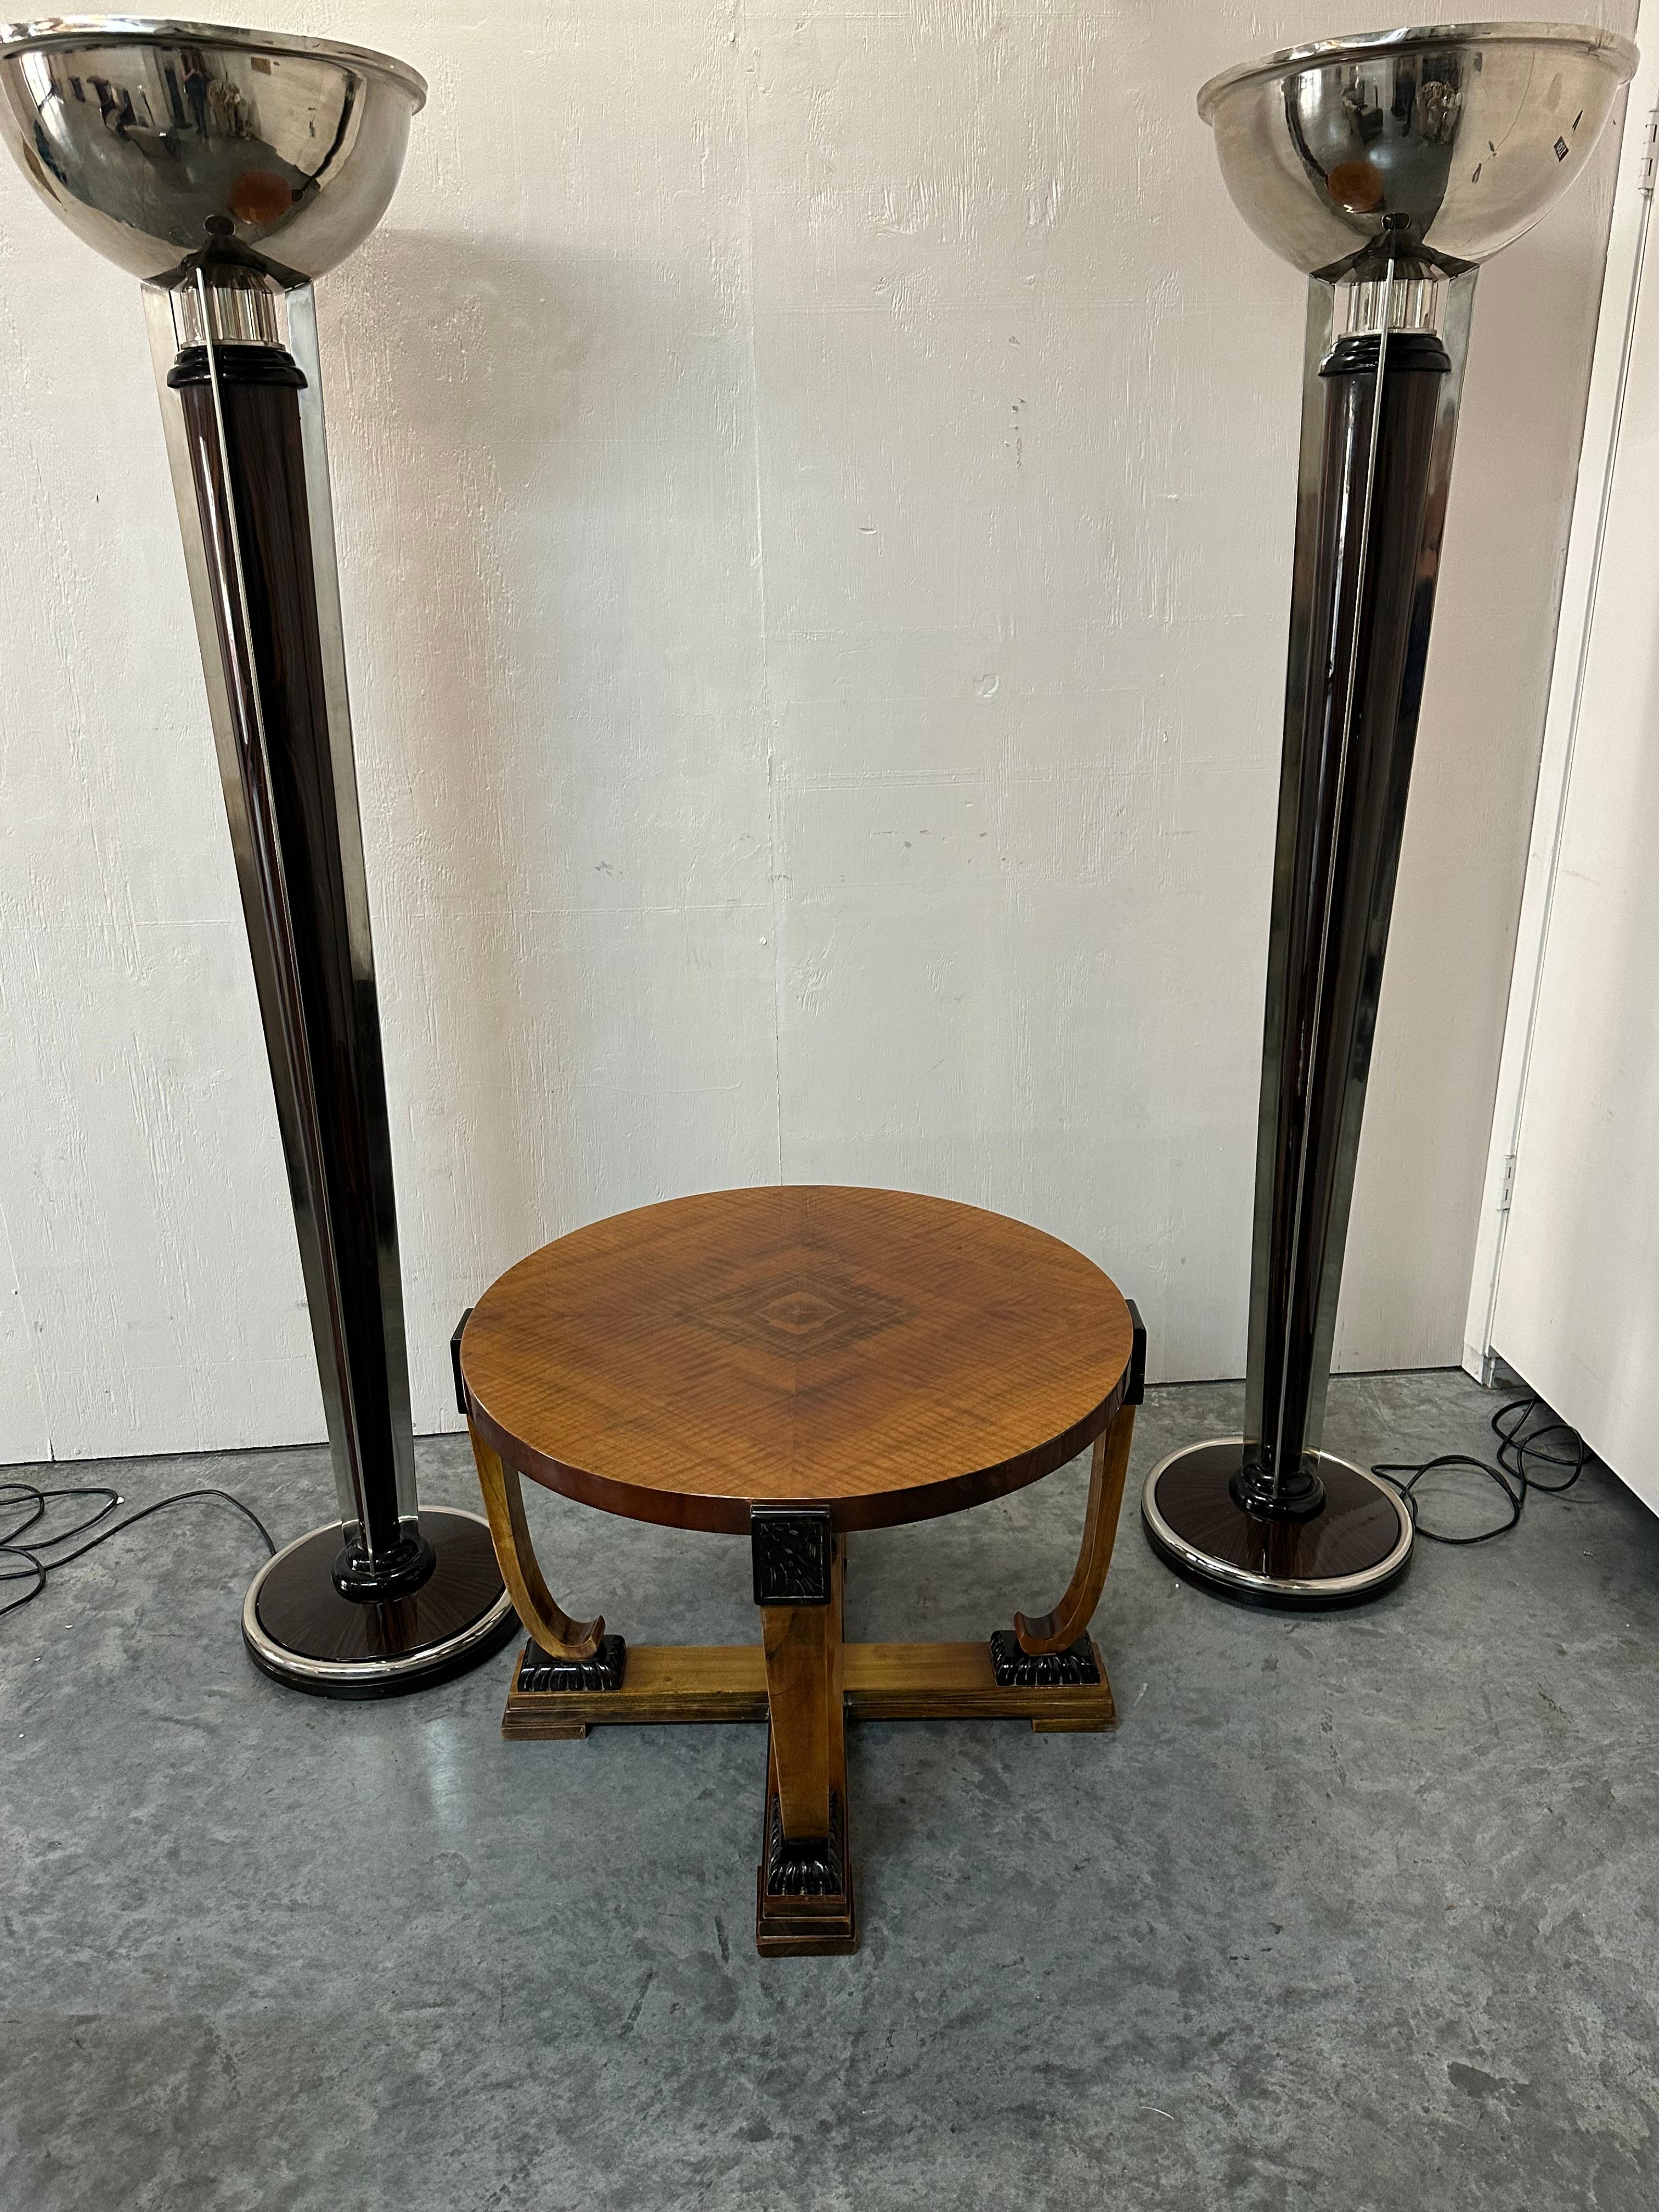 2 Art Deco Floor Lamps, France, Materials: Wood and Chrome, 1930 For Sale 10